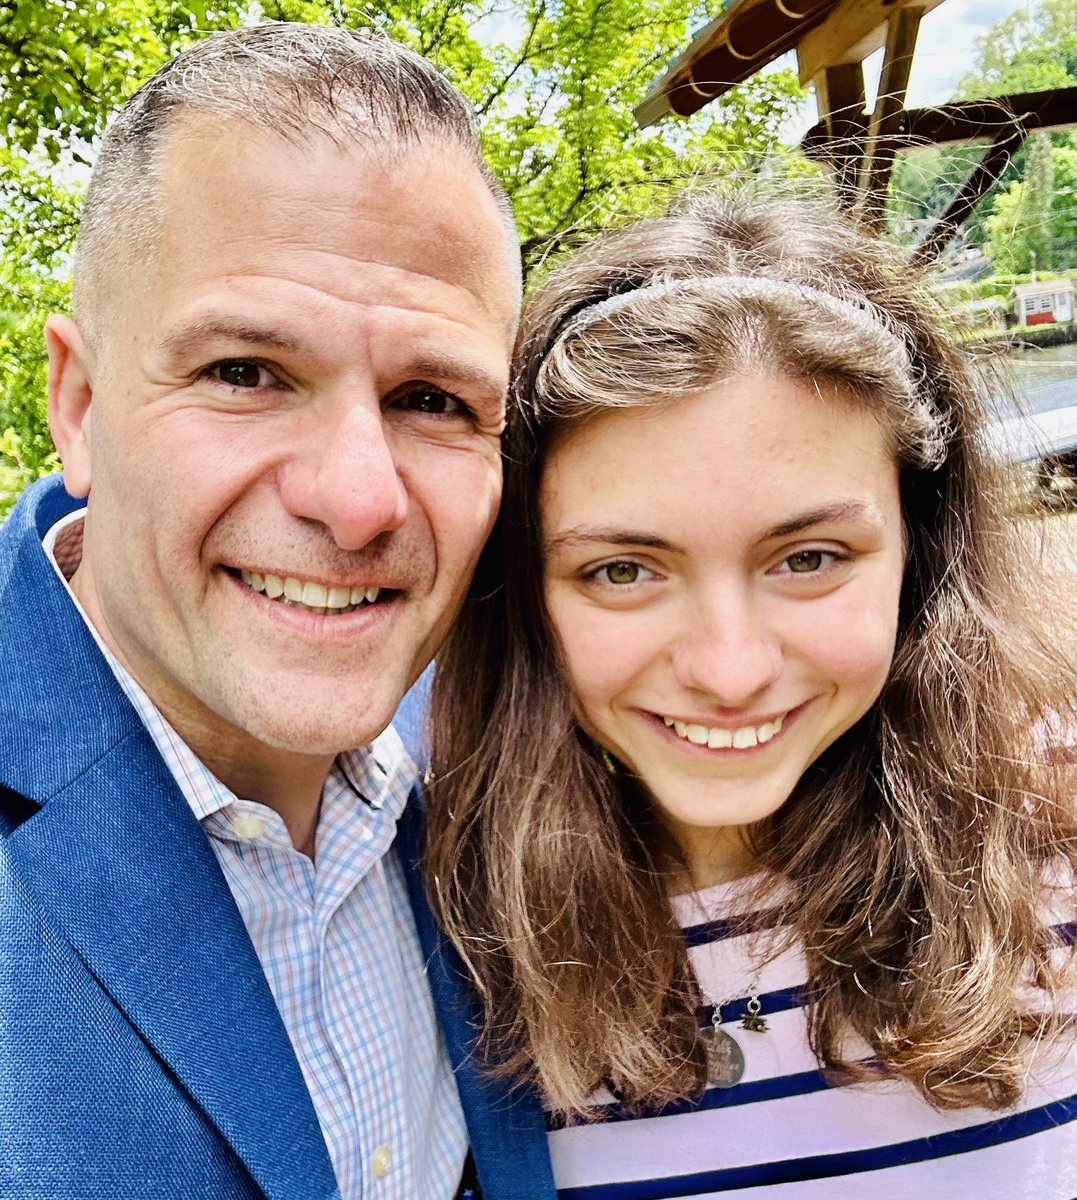 Out with my favorite young lady celebrating the great people and work of @TheArcUS of the Mid-Hudson! #ThinkDIFFERENTLY